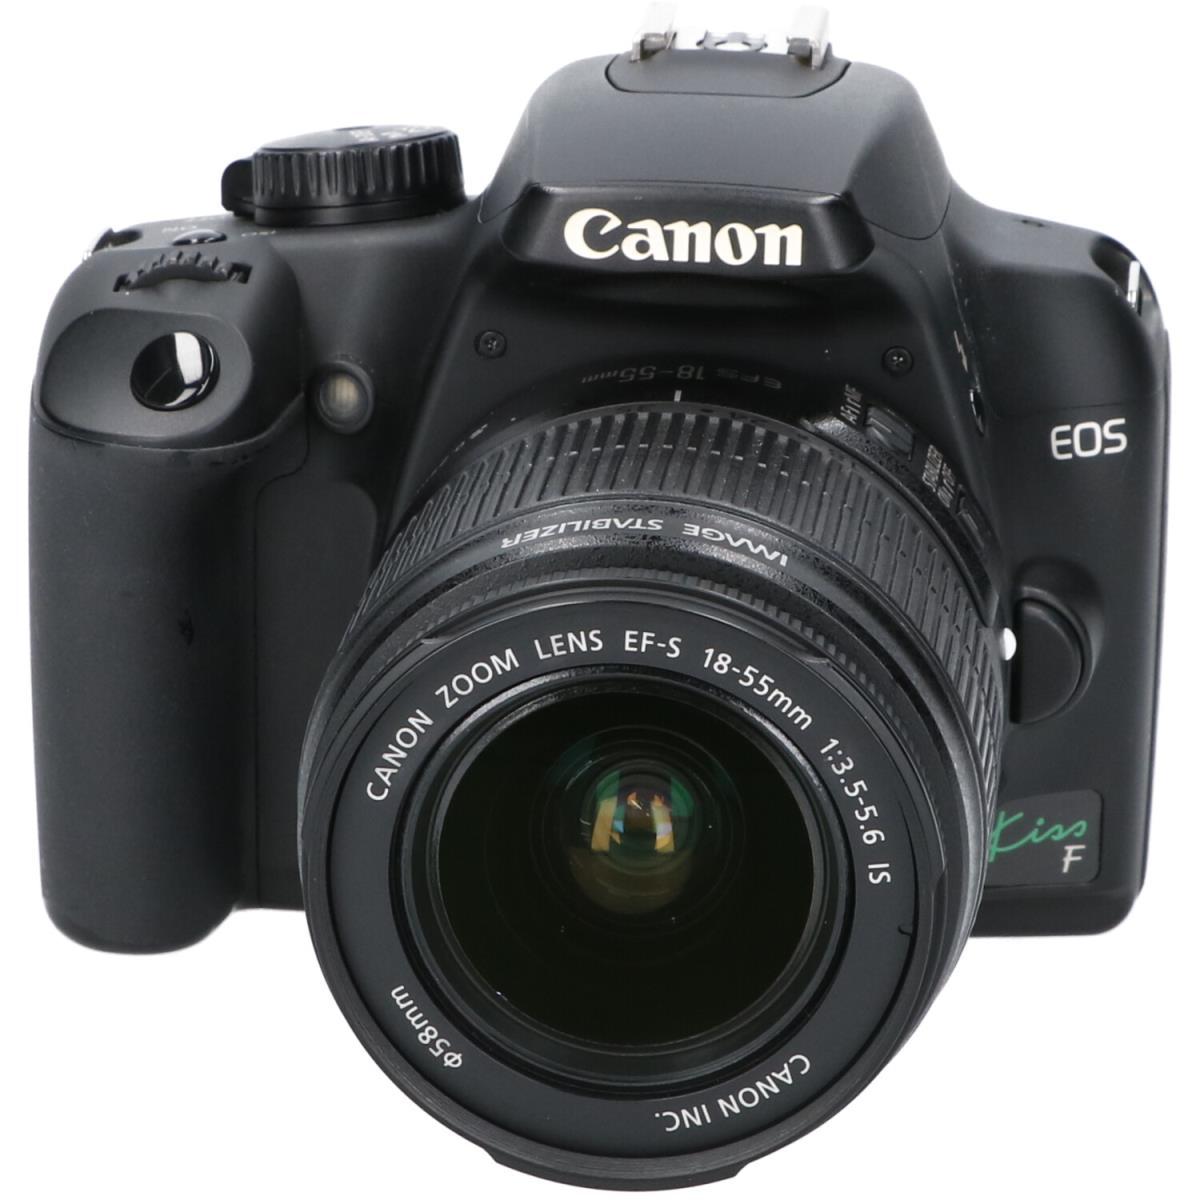 CANON　EOS　KISS　F18－55IS　KIT【中古】